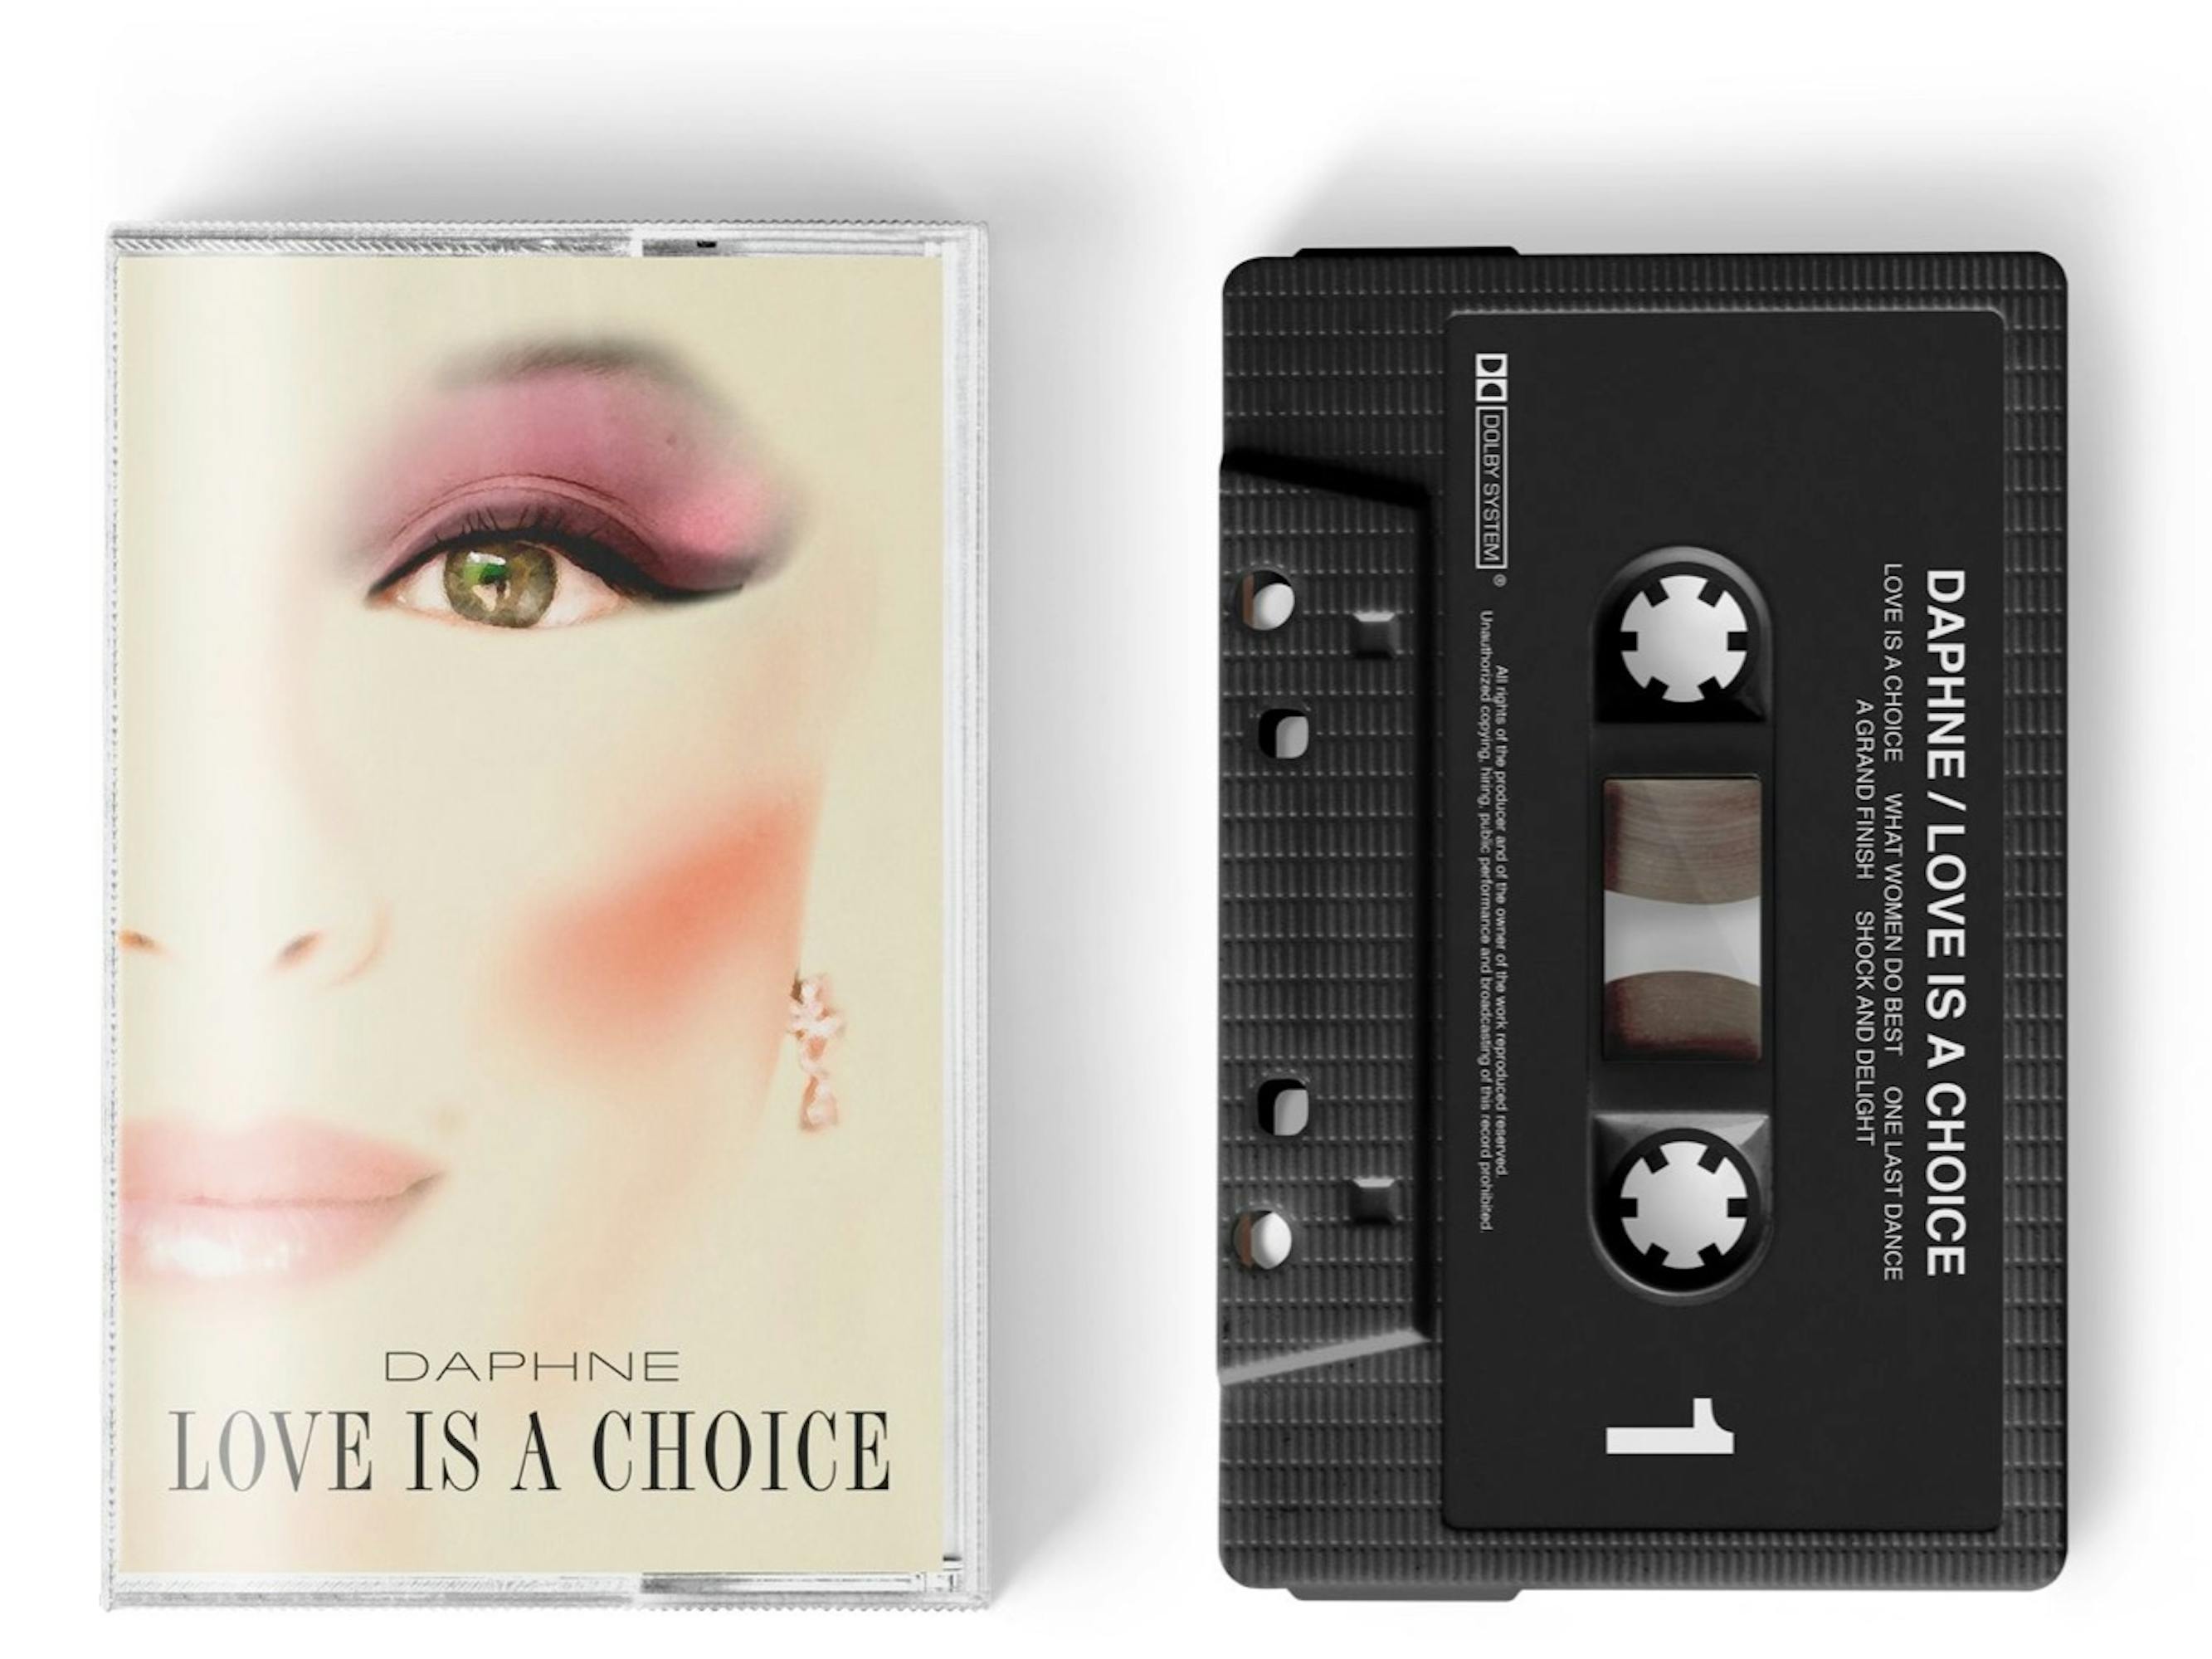 Daphne Bridgerton (Phoebe Dynevor) on a cassette tape cover. She wears pink eyeshadow, pink lipstick, and her cheekbone is accentuated with some blush. The cover and cassette itself read: “Daphne love is a choice.”